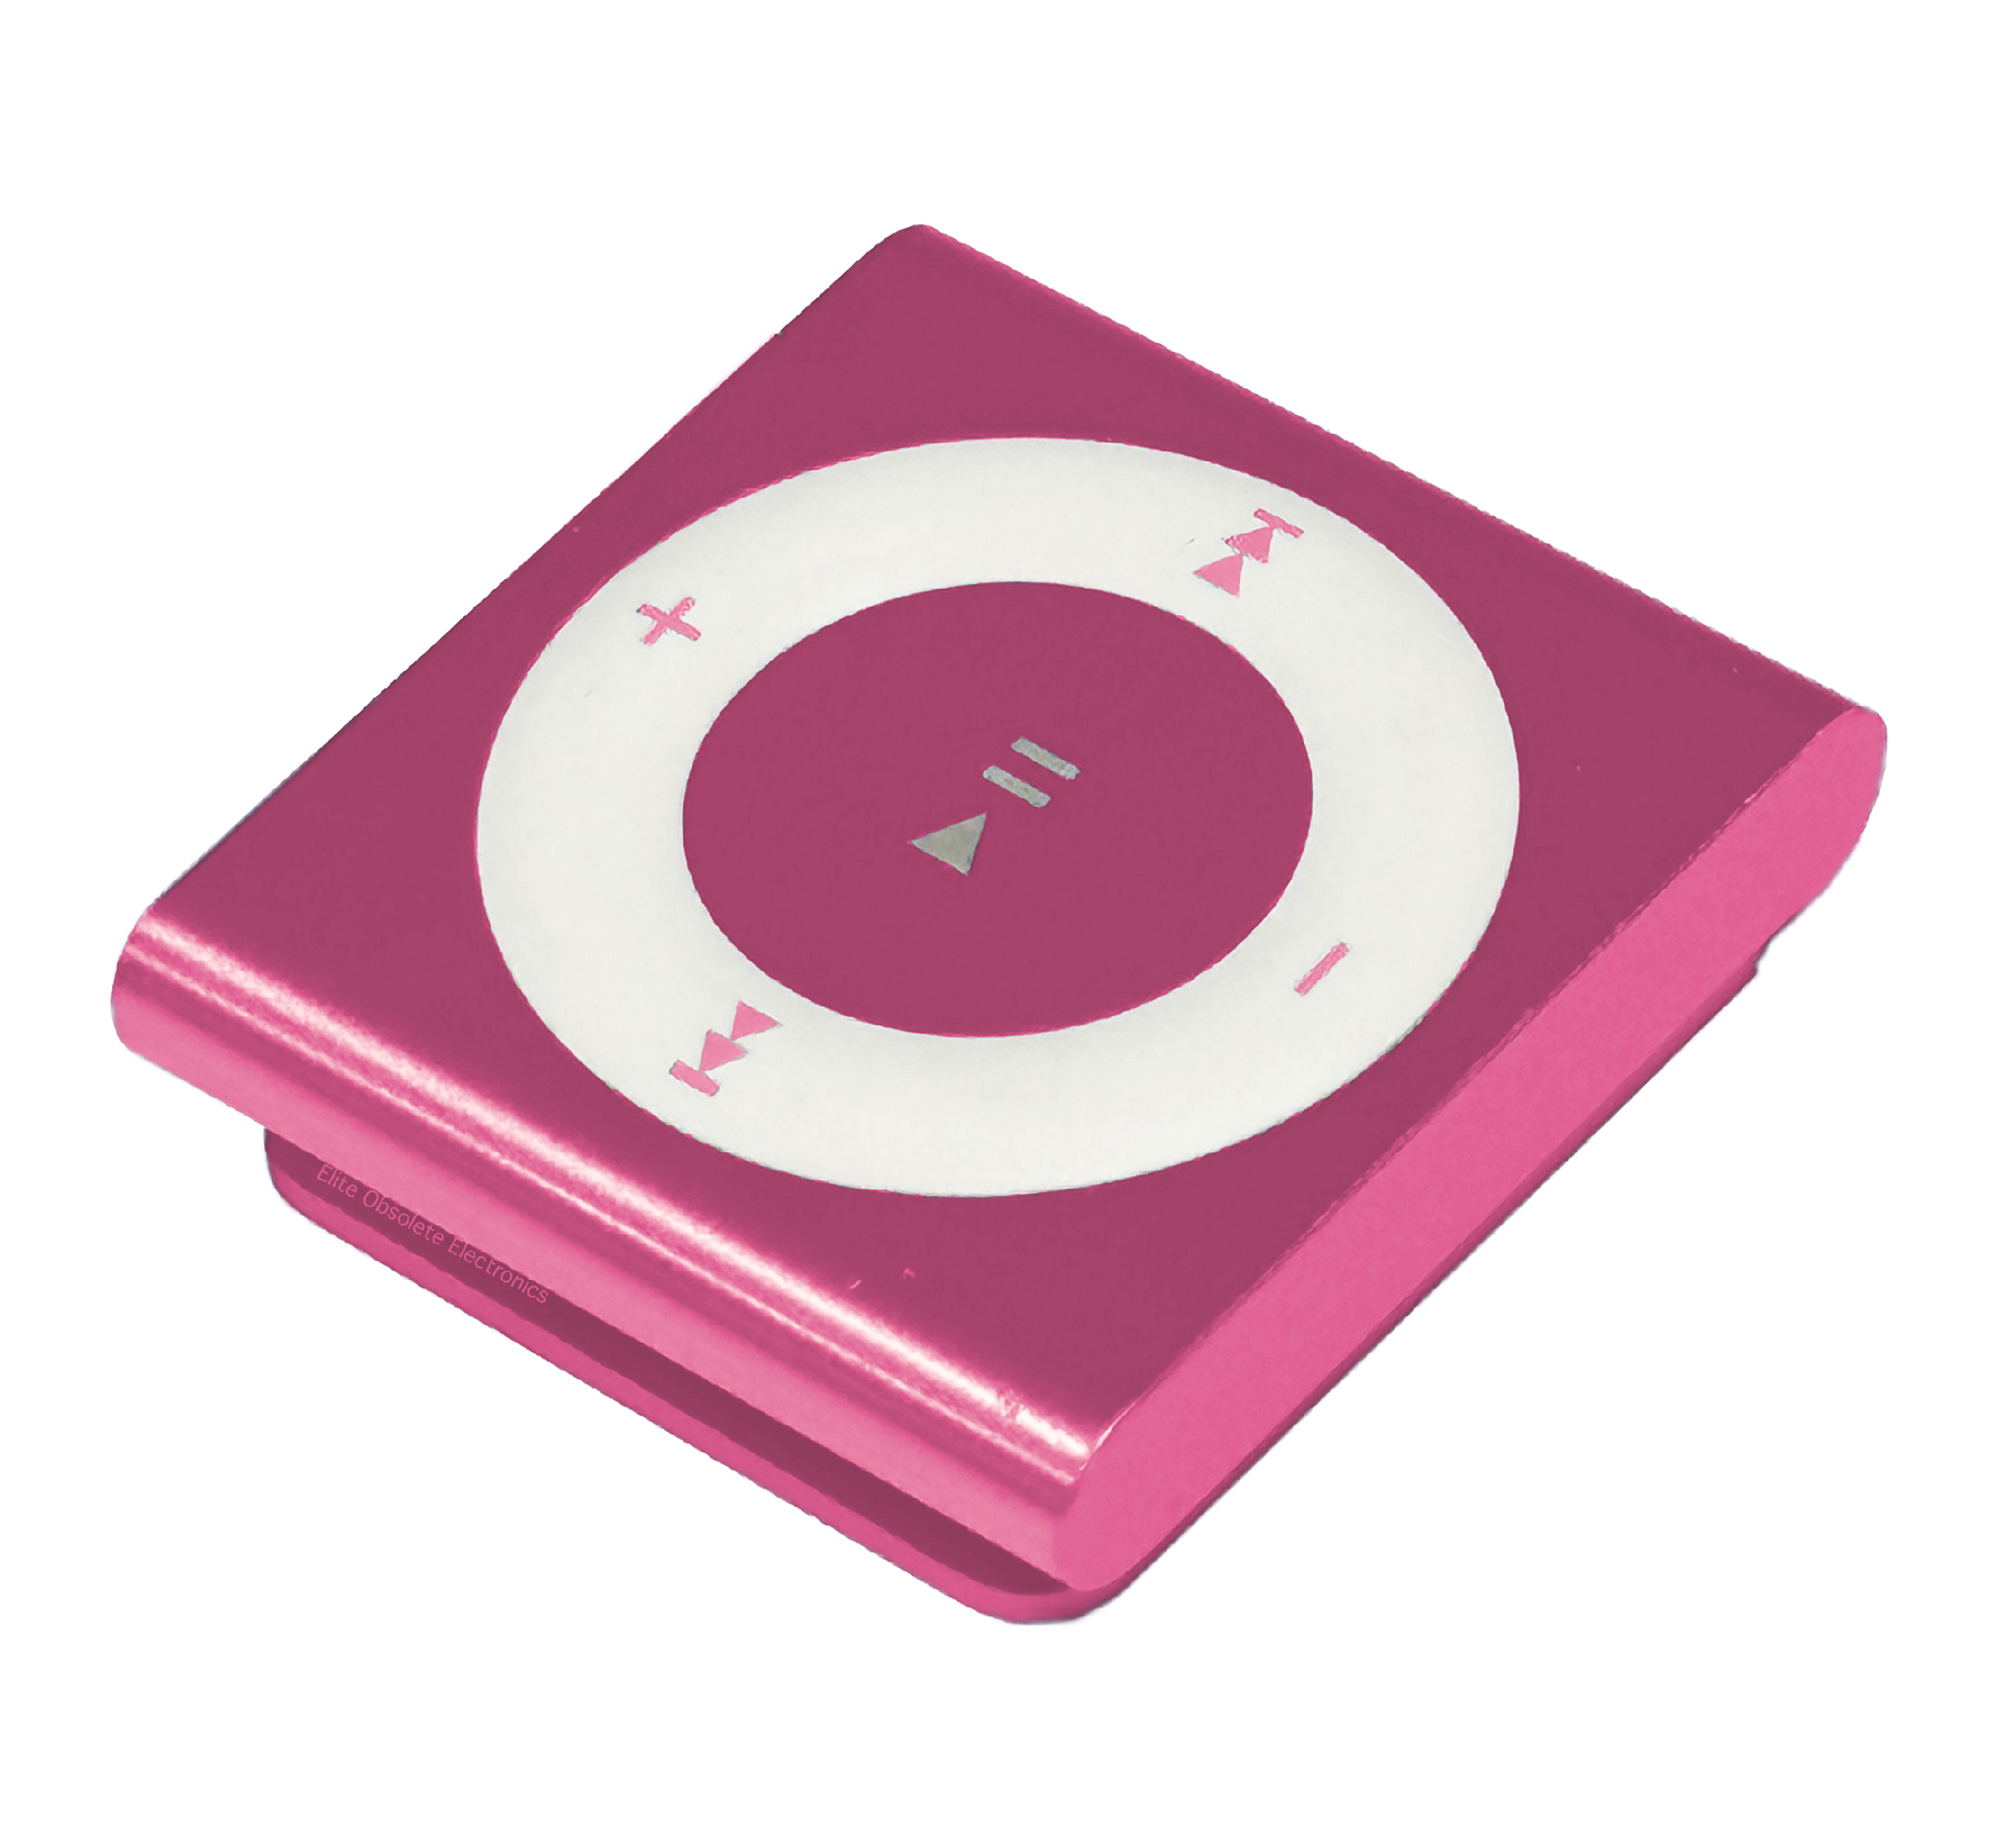 Used Apple iPod Shuffle 4th Generation 2GB Hot Pink A1373 MKM72LL/A